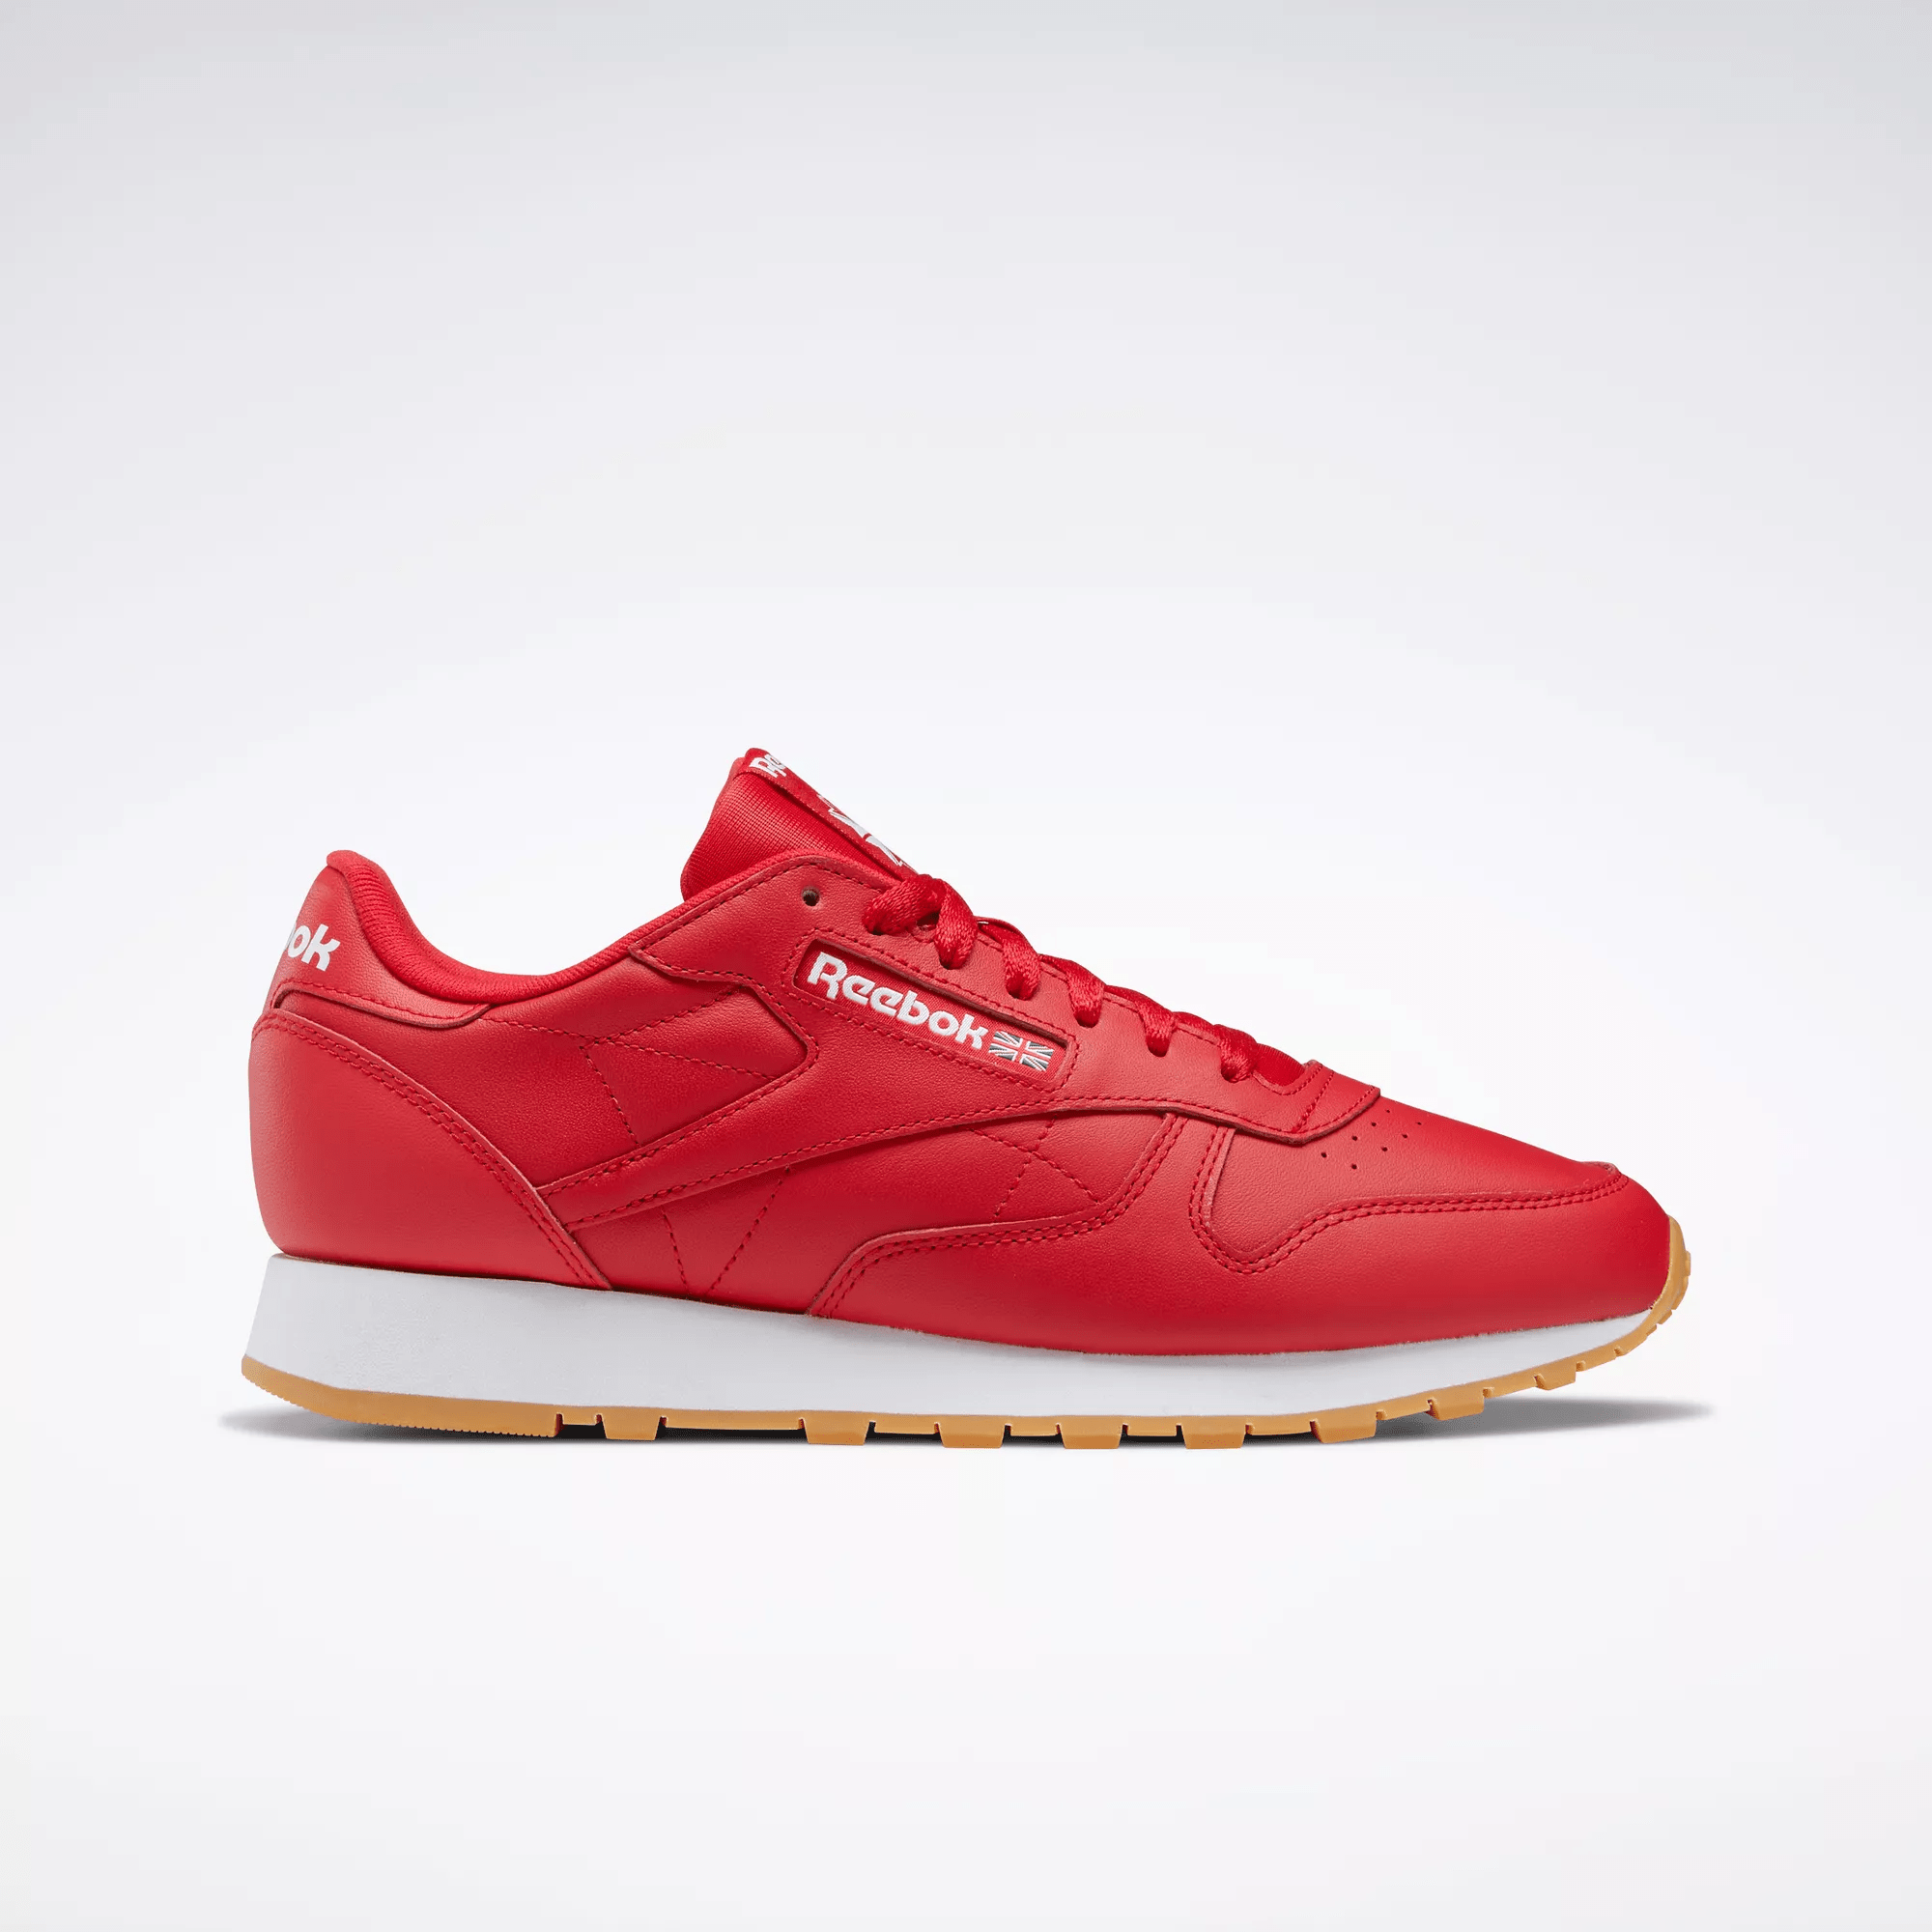 Reebok Classic Leather Shoes In Red